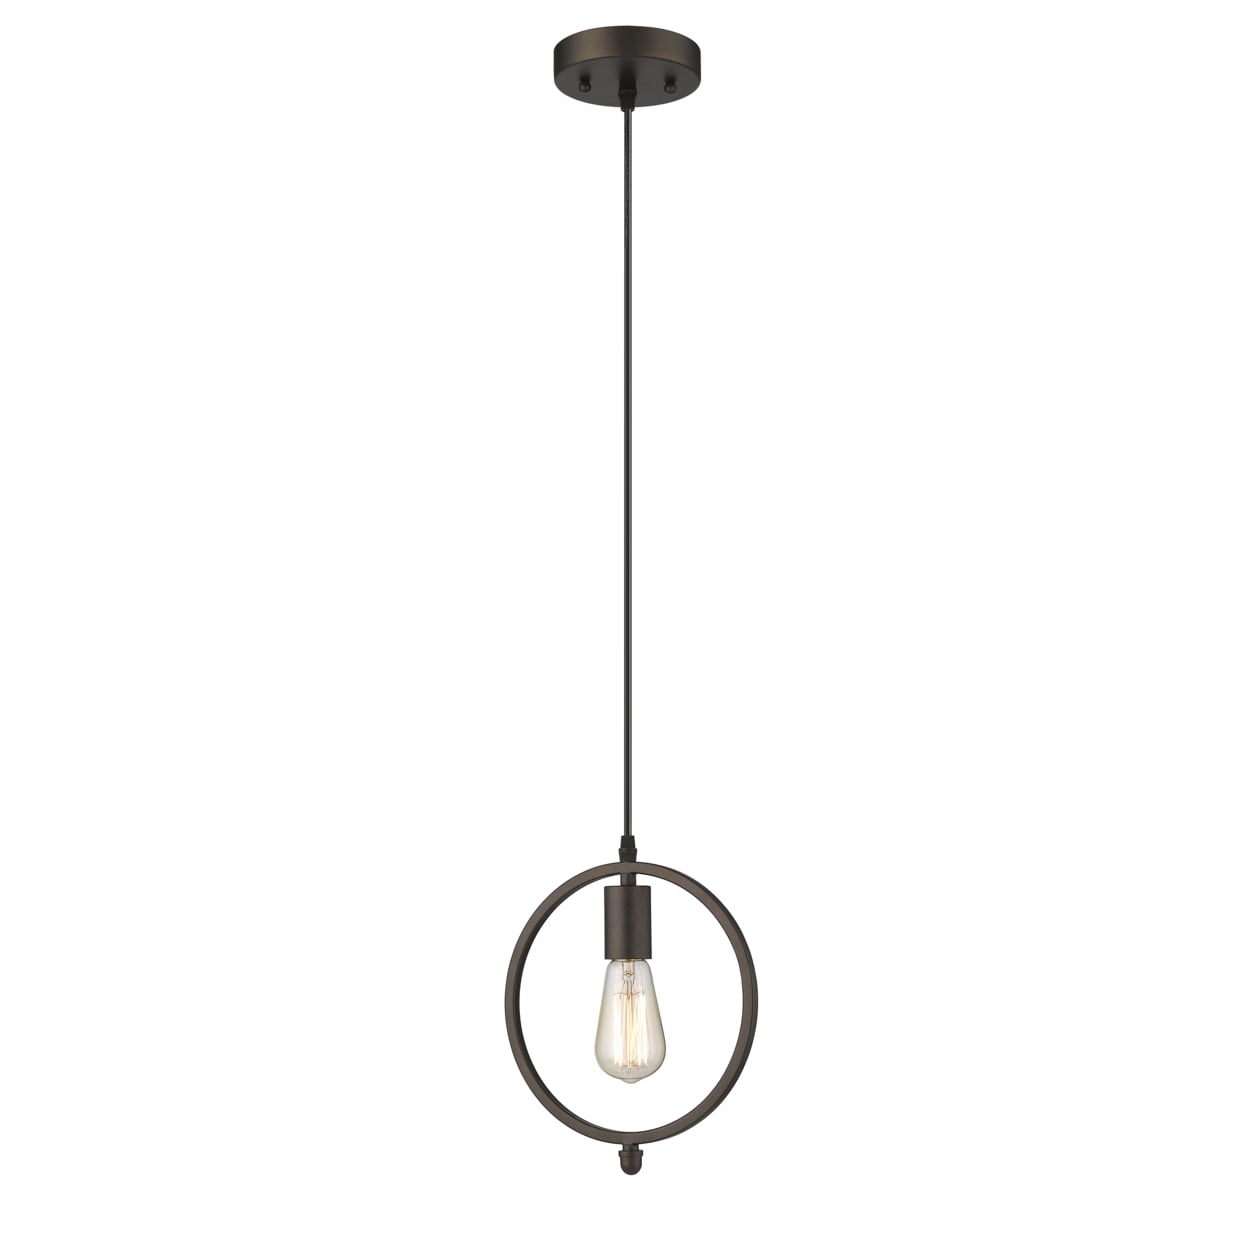 Ch2d005rb09-dp1 Ironclad Industrial 1 Light Rubbed Bronze Mini Ceiling Pendant - 9 In.